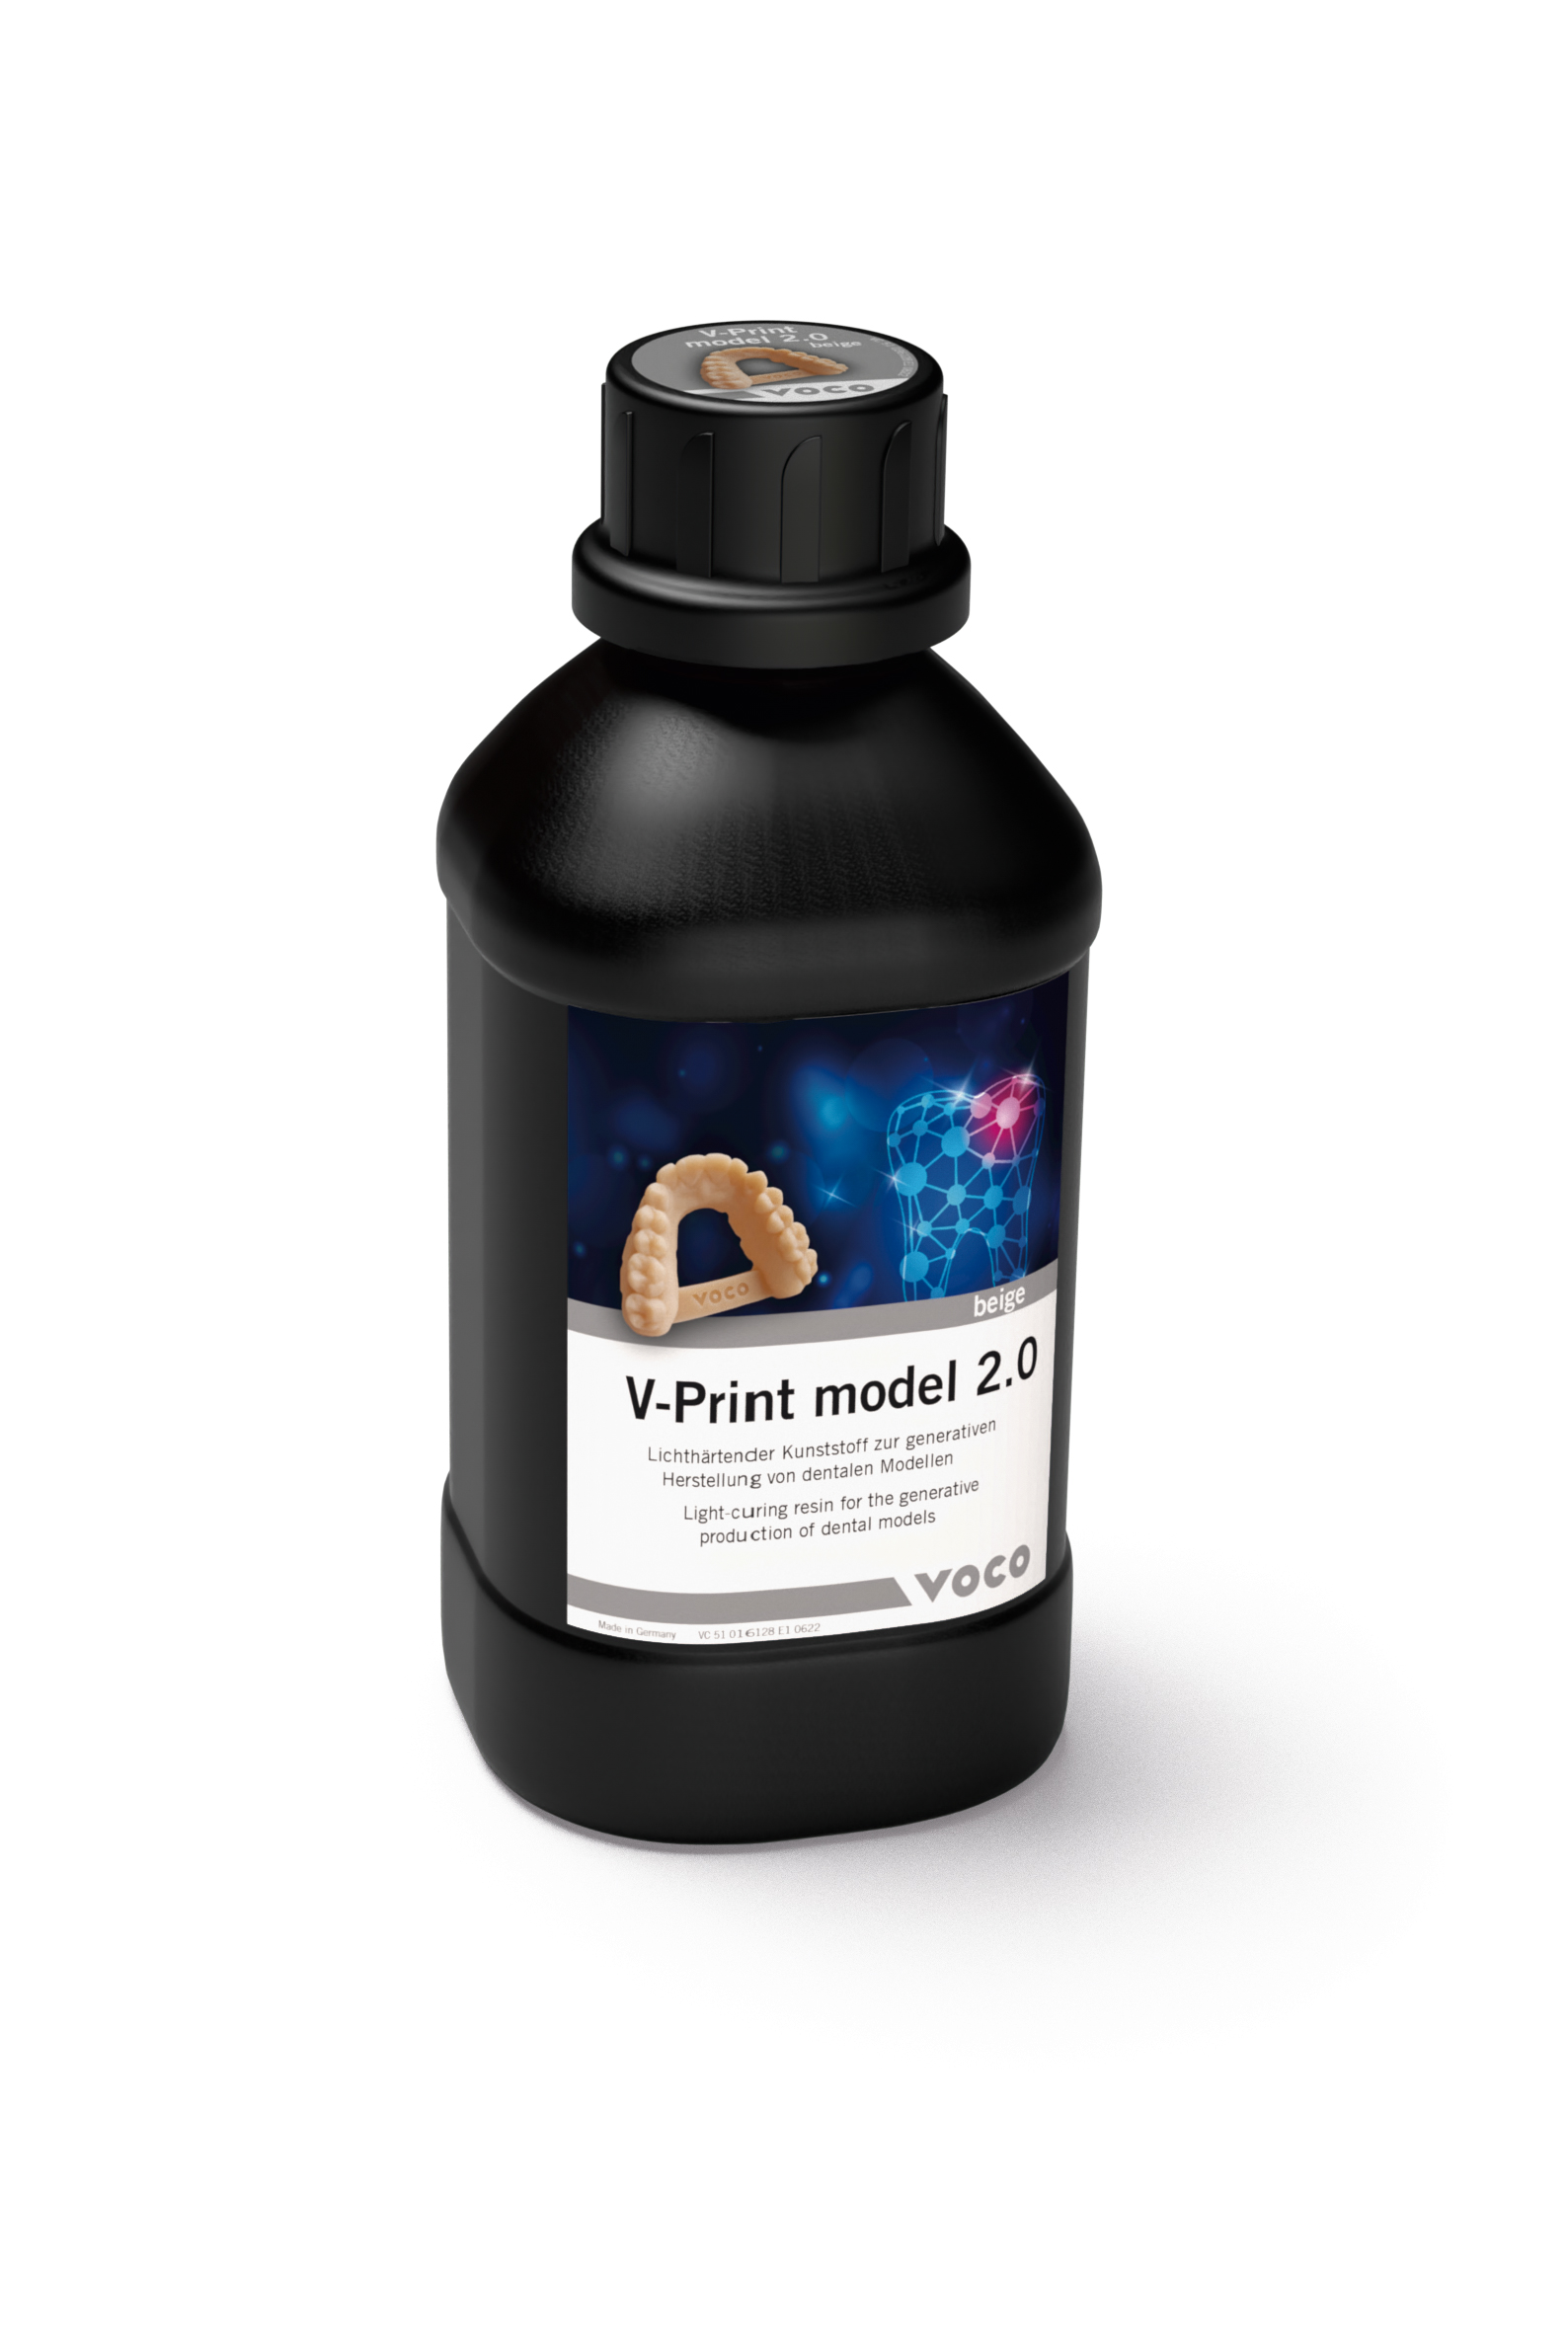 With V-Print model 2.0, high-quality models of modern dental technology can be p